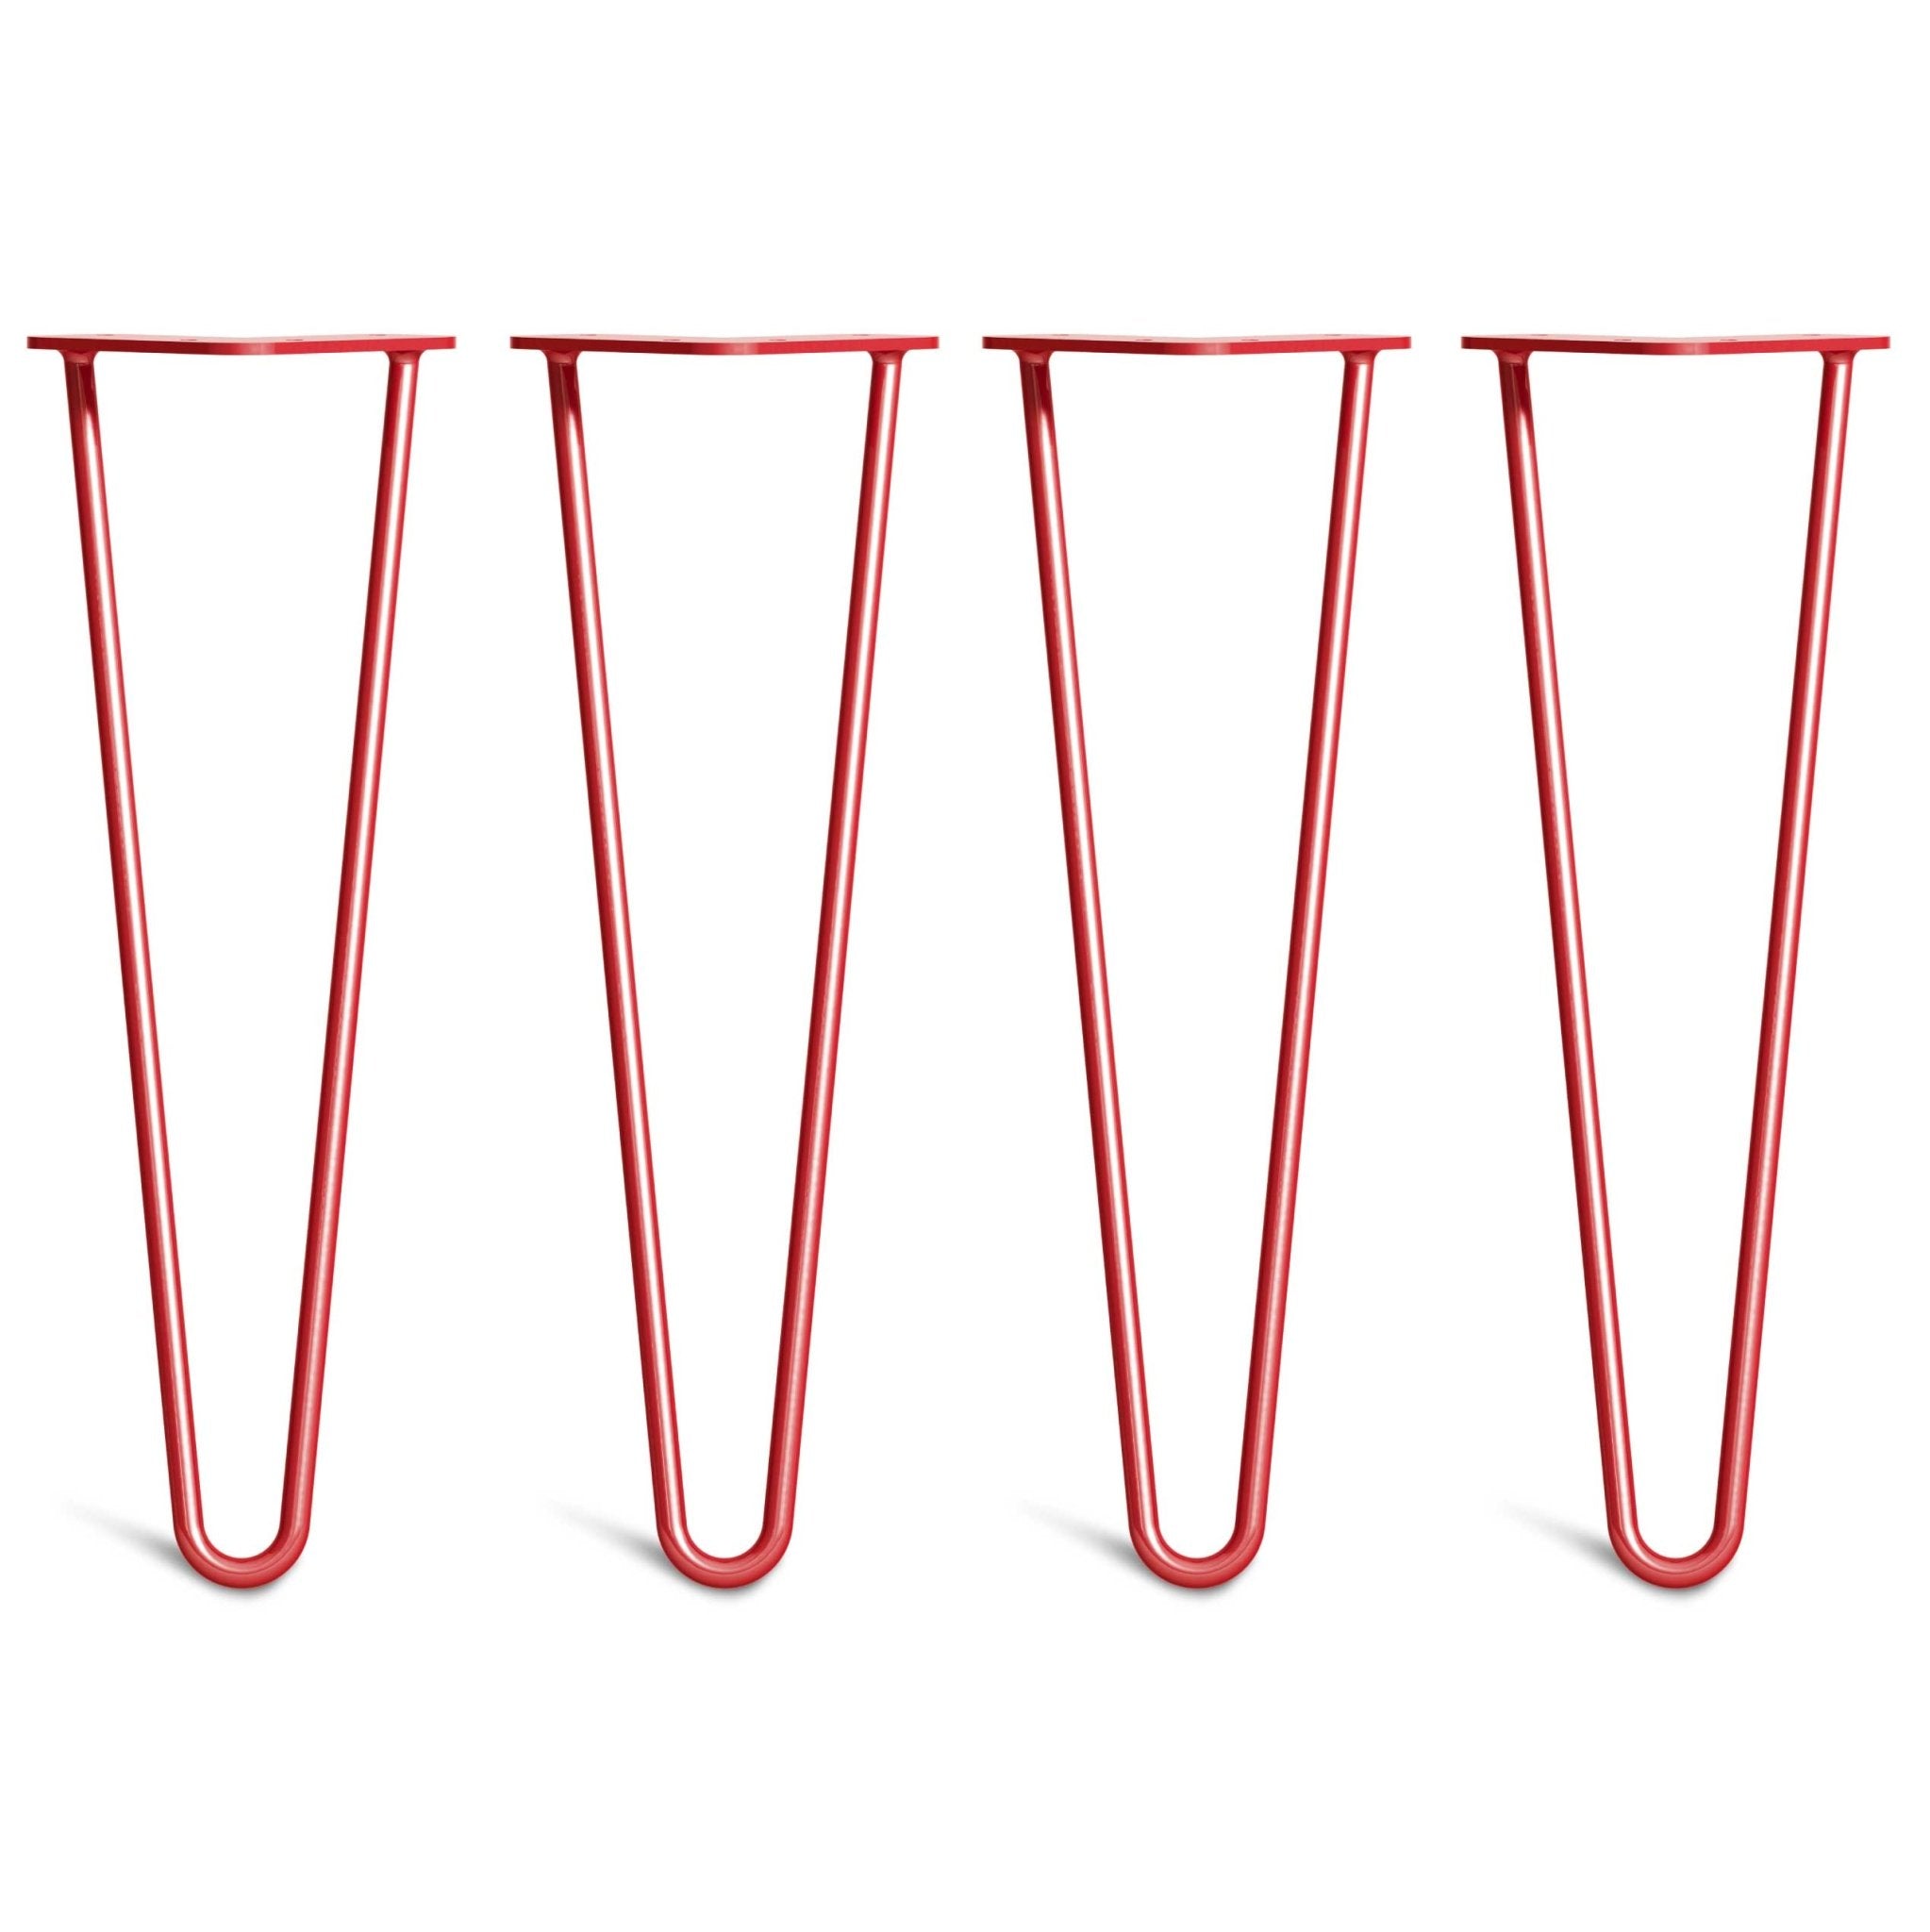 40cm Hairpin Legs - Bench-2 Rod-Red-The Hairpin Leg Co.